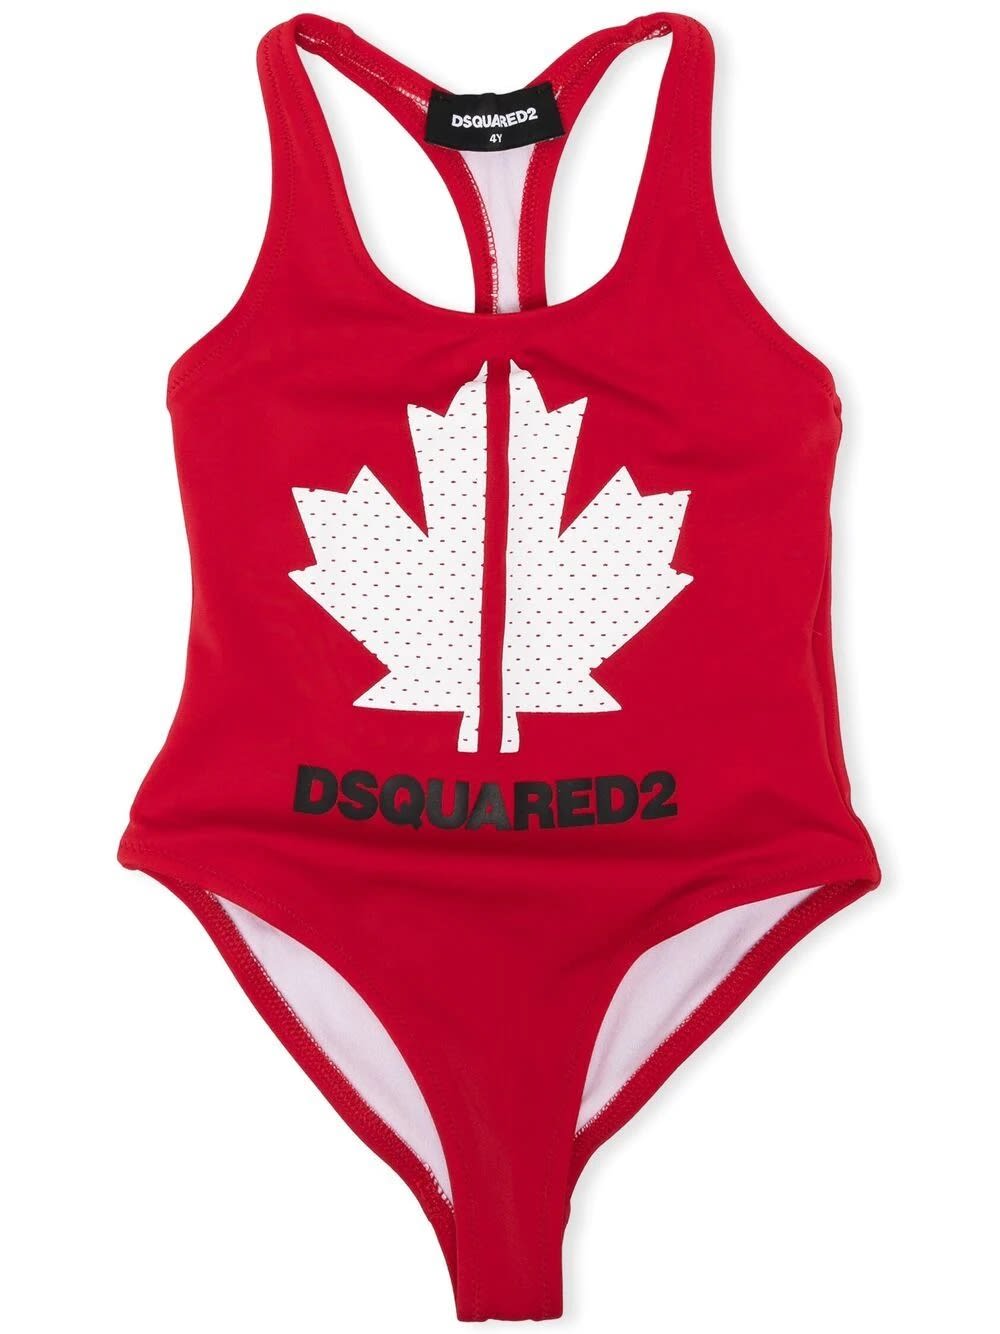 DSQUARED2 ONE PIECE SWIMSUIT WITH PRINT,D2M44F-DQ0053-D000VT DQ415